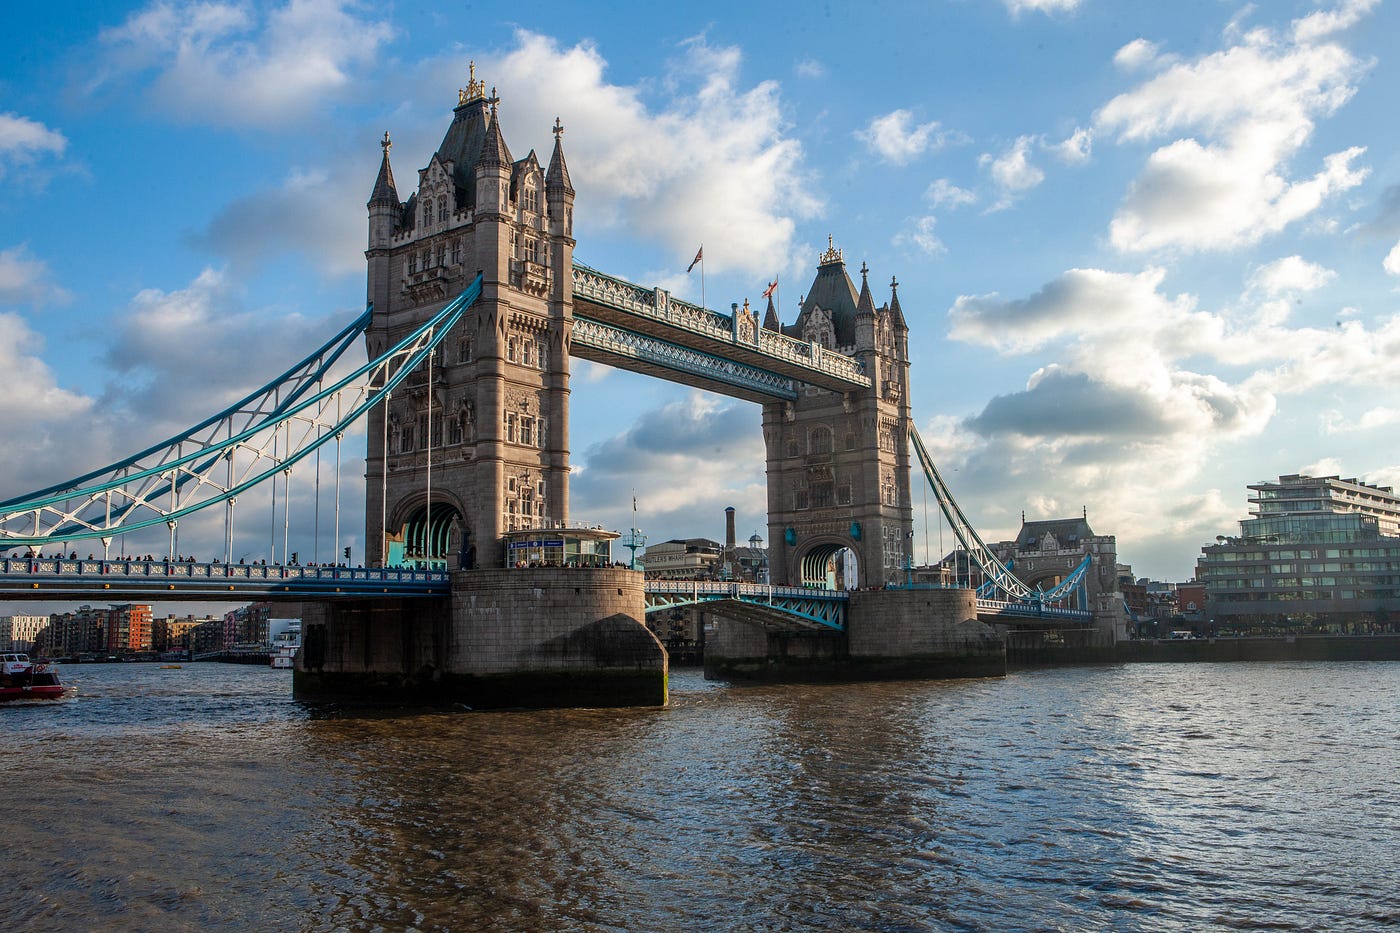 London’s Tower Bridge in daytime. Blue sky with some cumulus clouds. We see the bridge from a low perspective from across the river, diagonally.